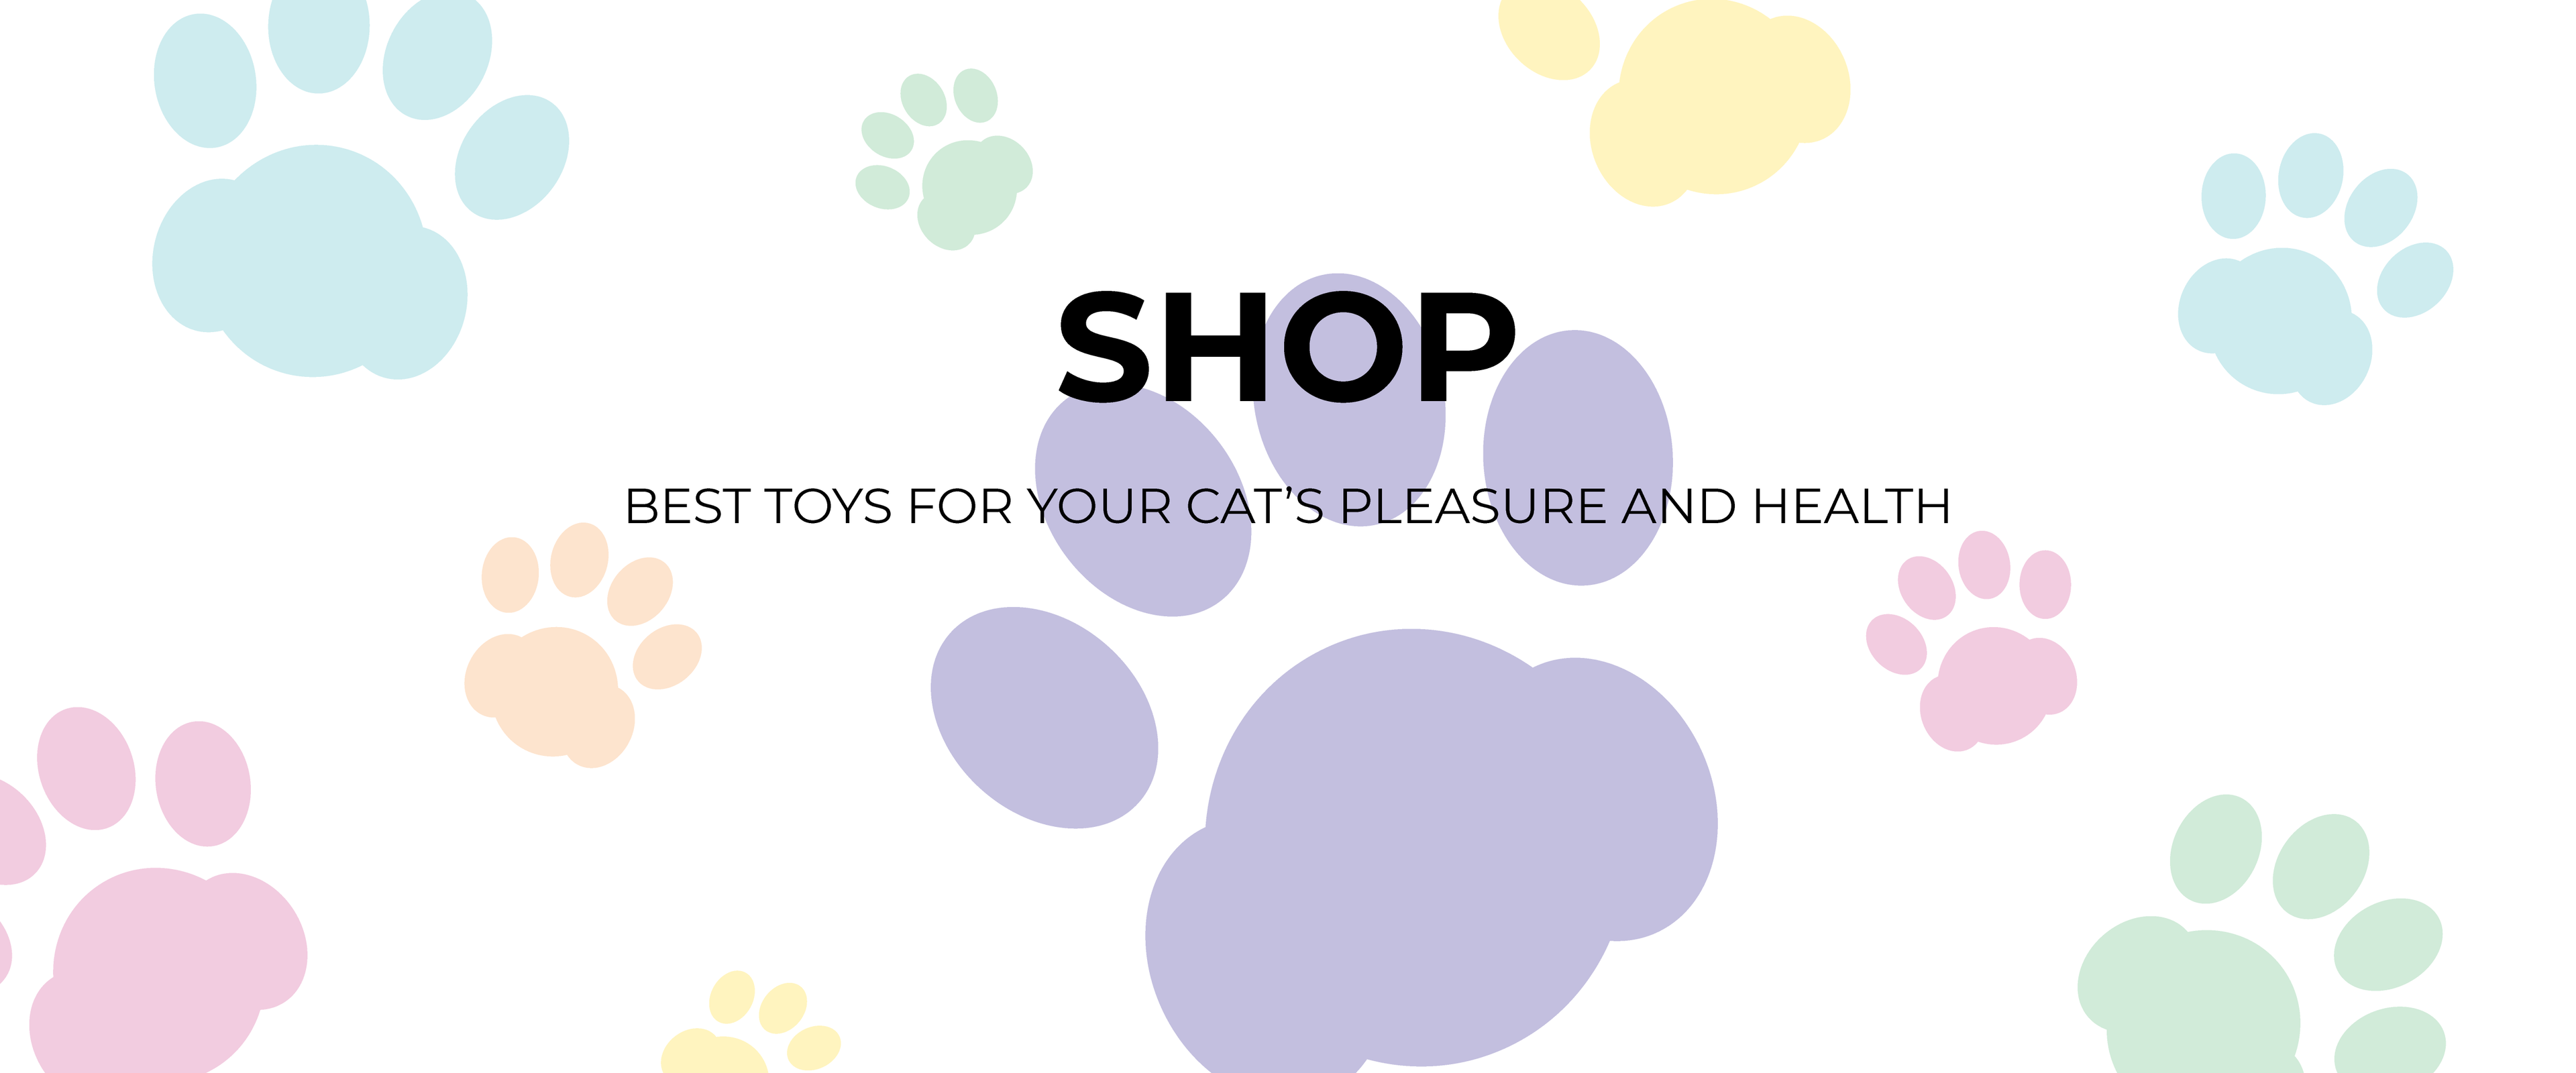 AWOOF Cat Mat, Cute Soft Catnip Mat, Cat Activity Mat Machine Washable Cat  Play Mat for Small Medium Large Cats with 8 Pockets, Crinkle Paper